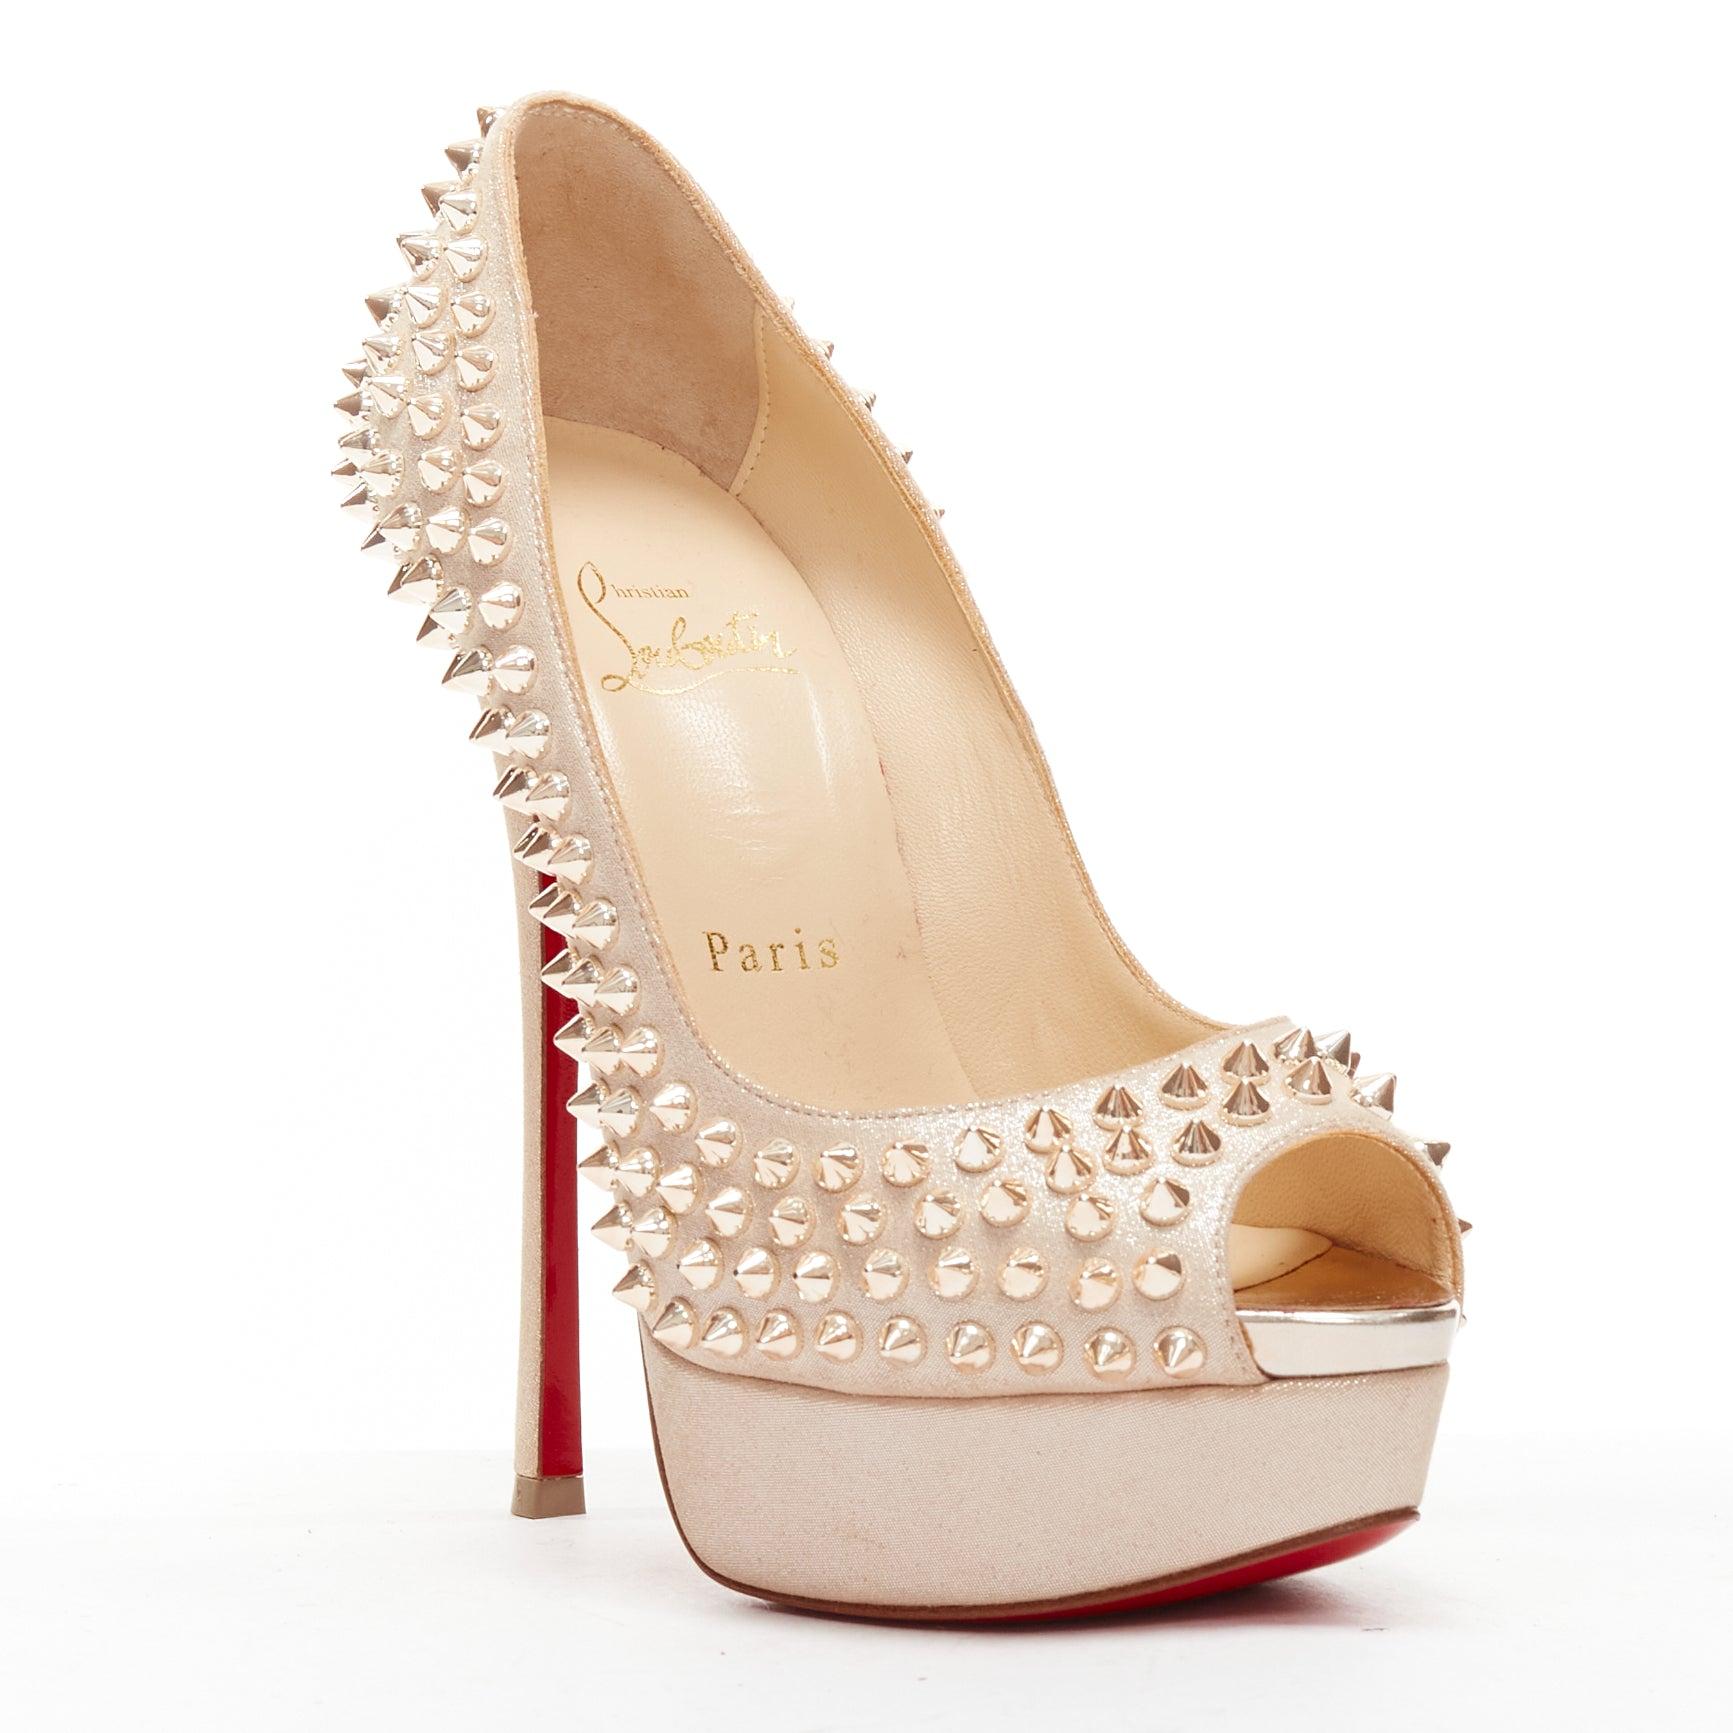 CHRISTIAN LOUBOUTIN Lady Peep metallic gold spike platform peep toe EU36.5
Reference: TGAS/D00524
Brand: Christian Louboutin
Model: Lady Peep
Material: Leather
Color: Gold
Pattern: Solid
Closure: Slip On
Lining: Nude Leather
Made in: